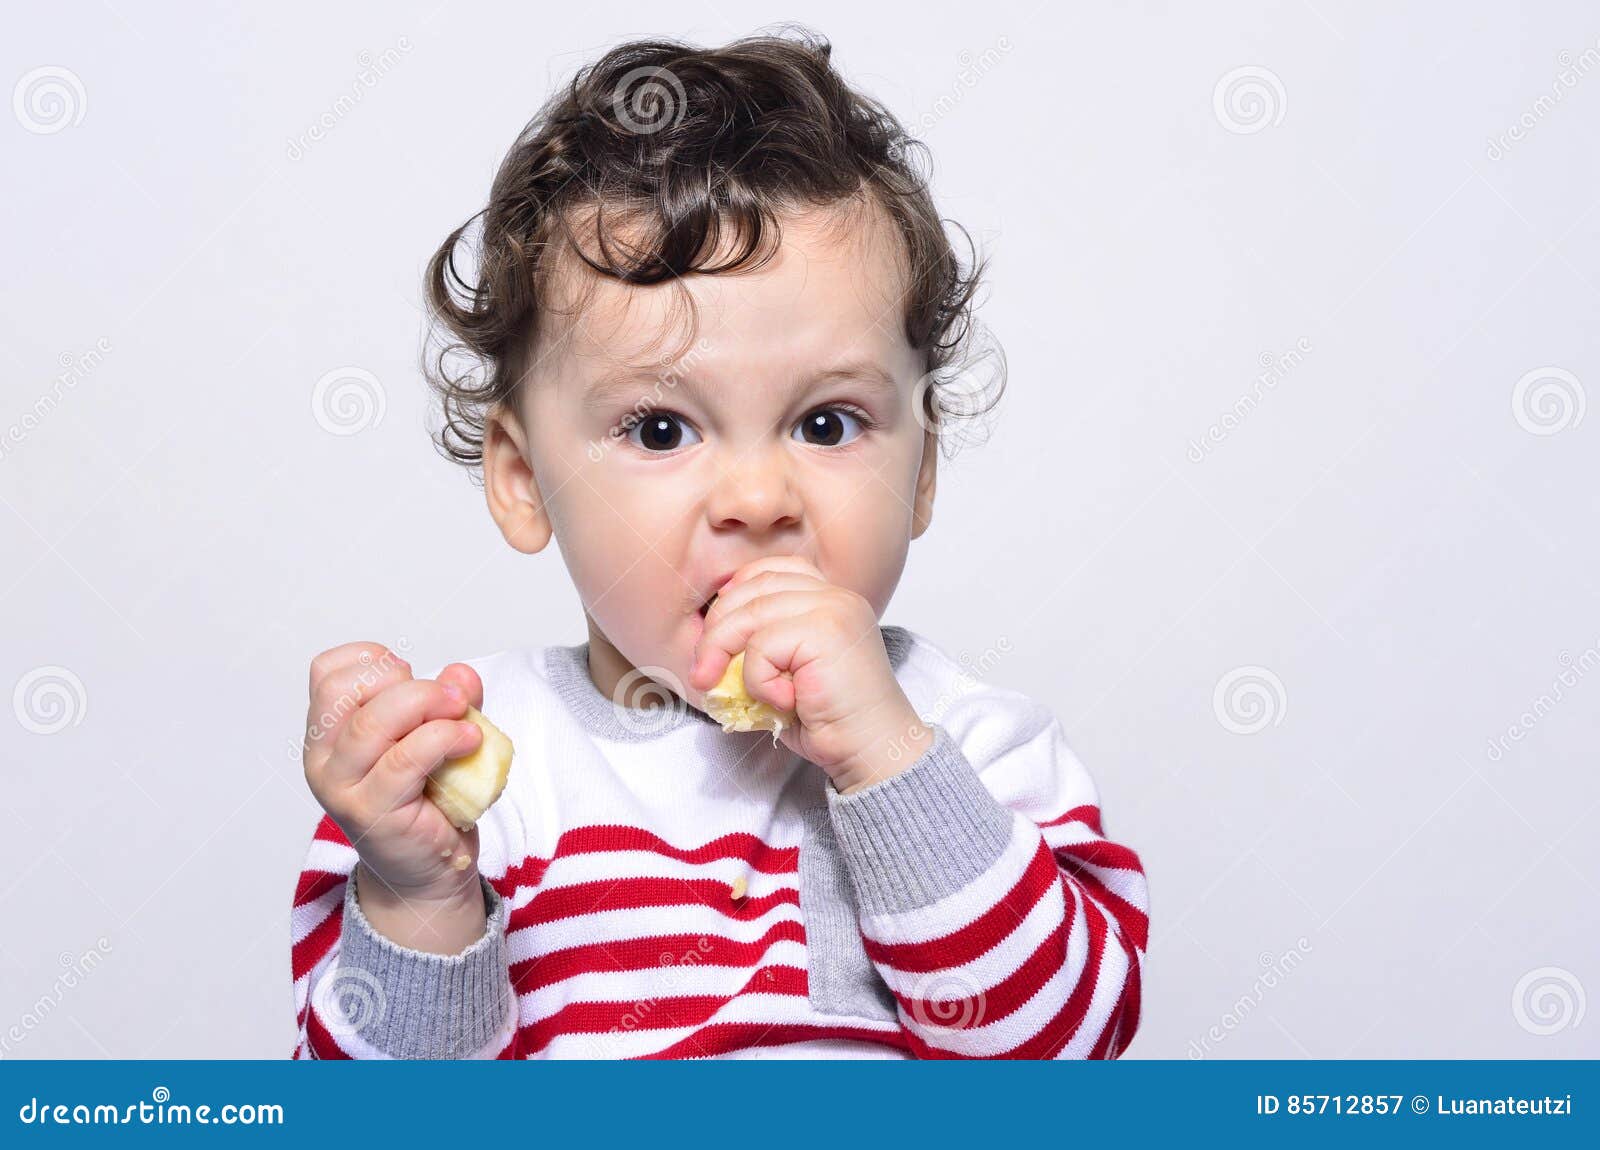 Portrait of a Cute Baby Eating a Banana. Stock Image - Image of grimace ...